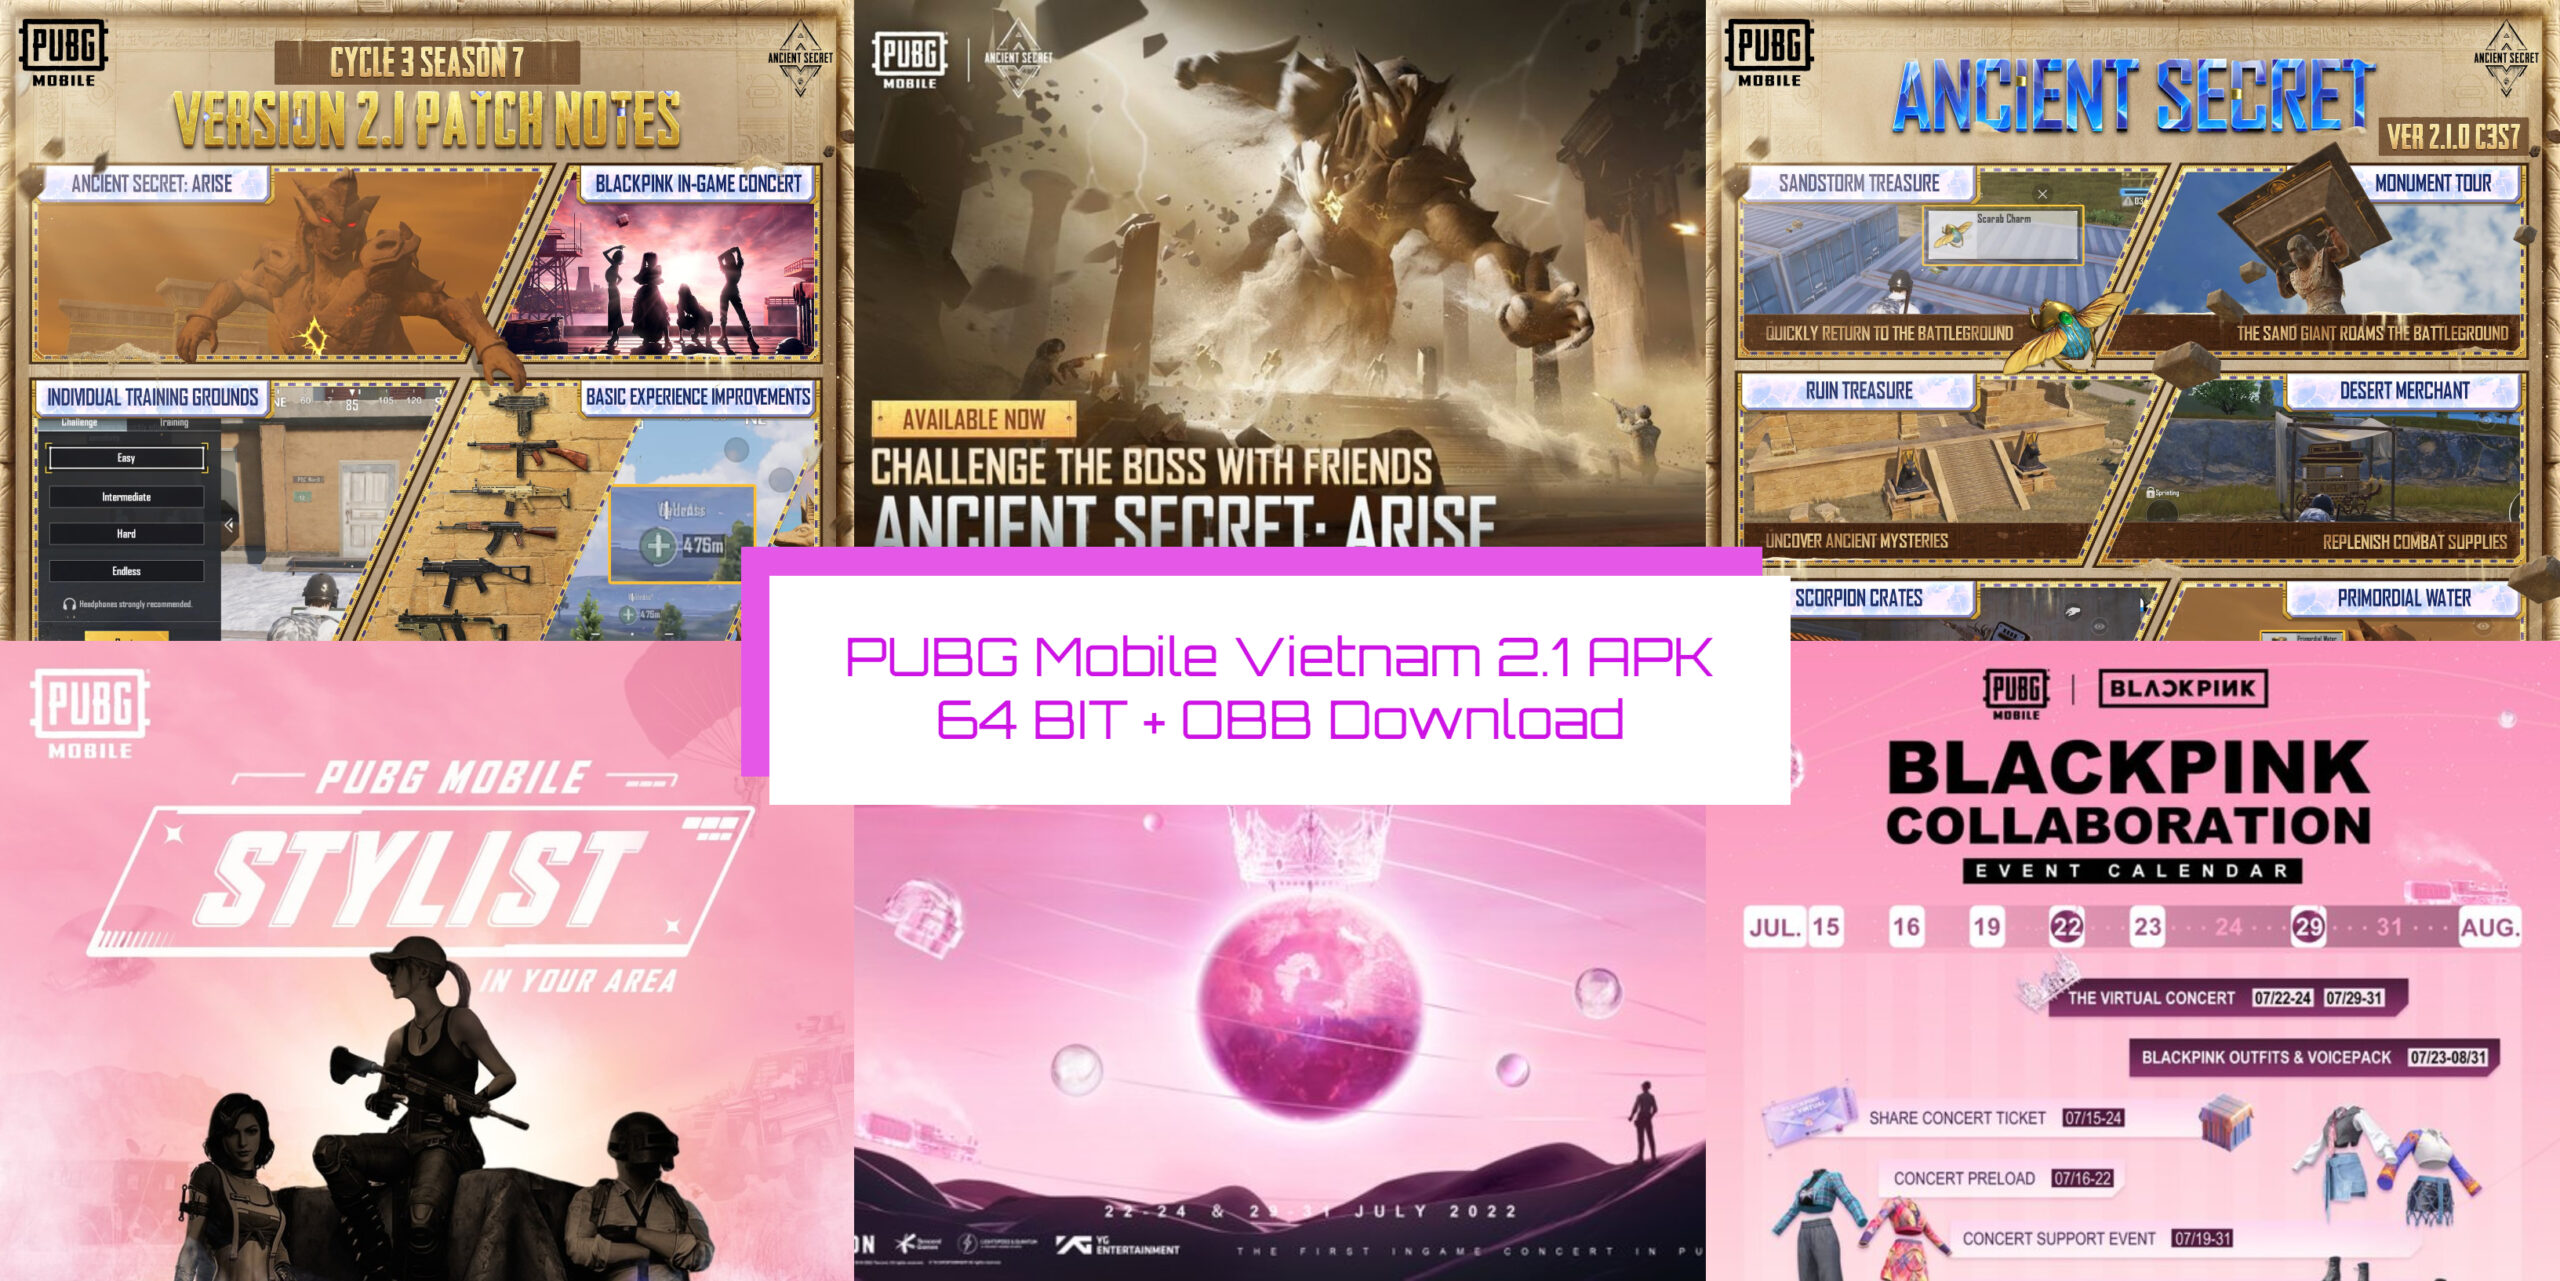 You are currently viewing PUBG Mobile VN 2.1.0 APK 64 BIT + OBB Download